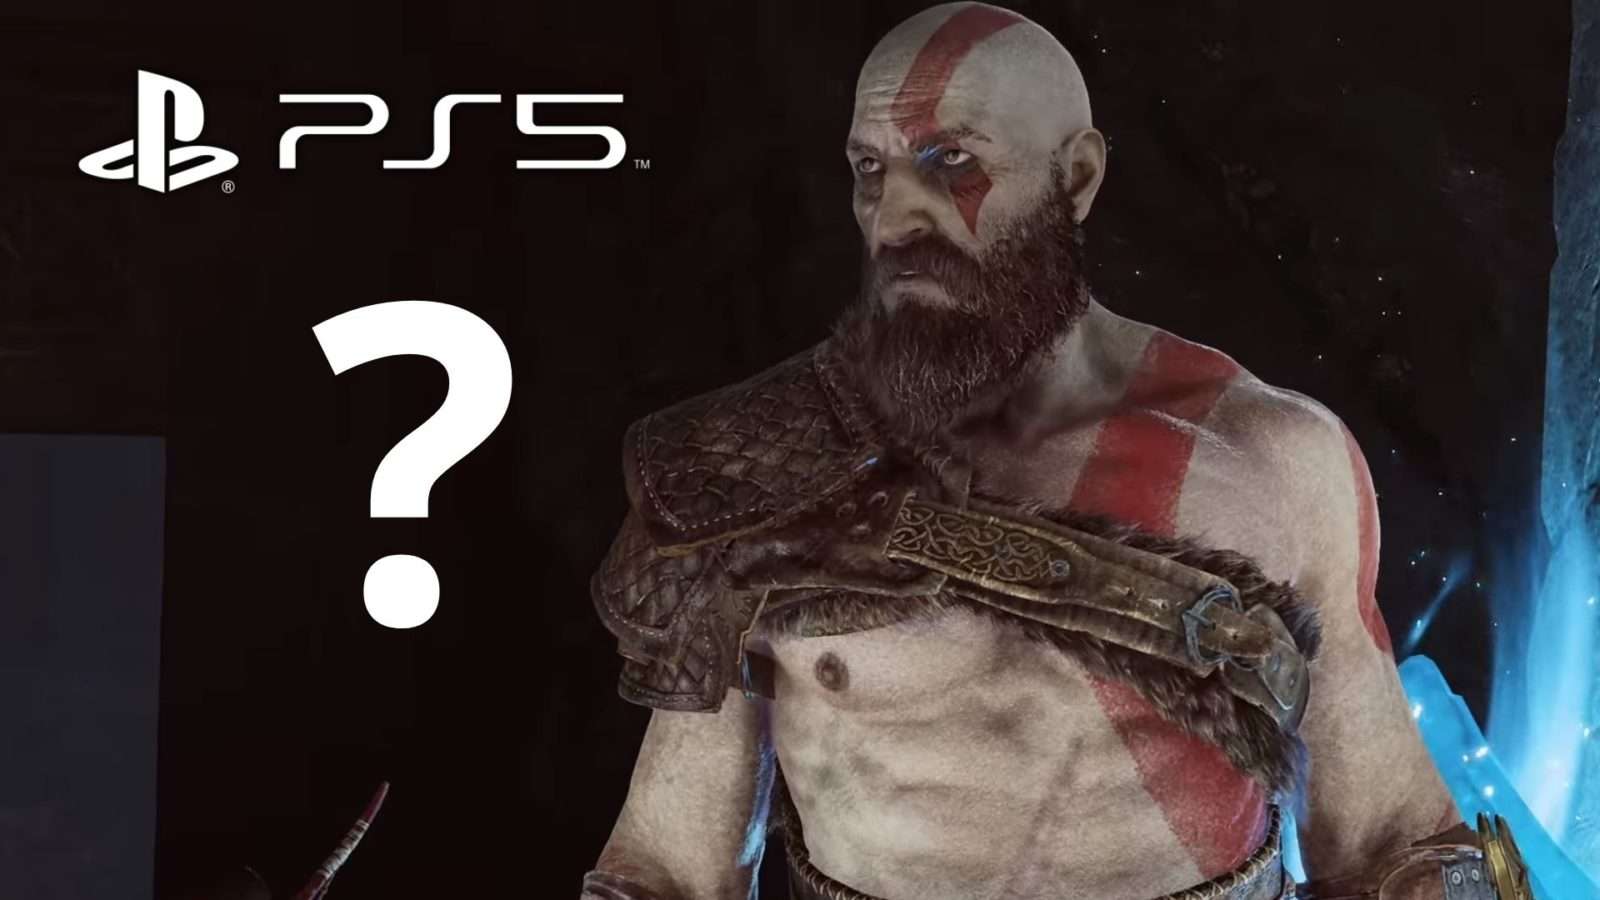 kratos in god of war and PS5 logo